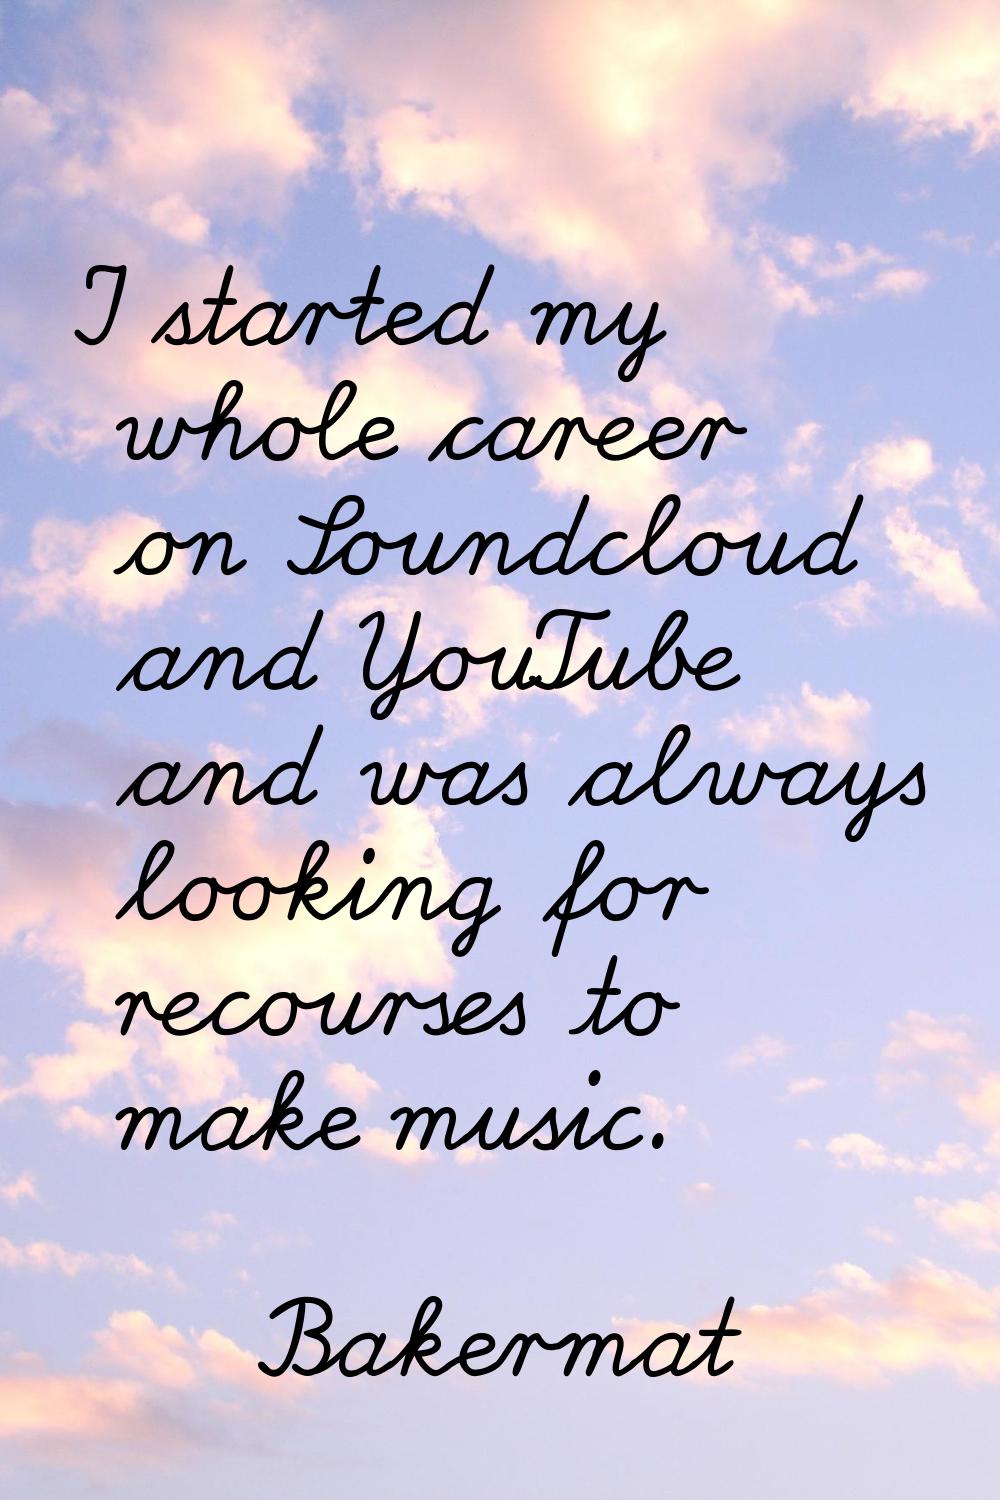 I started my whole career on Soundcloud and YouTube and was always looking for recourses to make mu